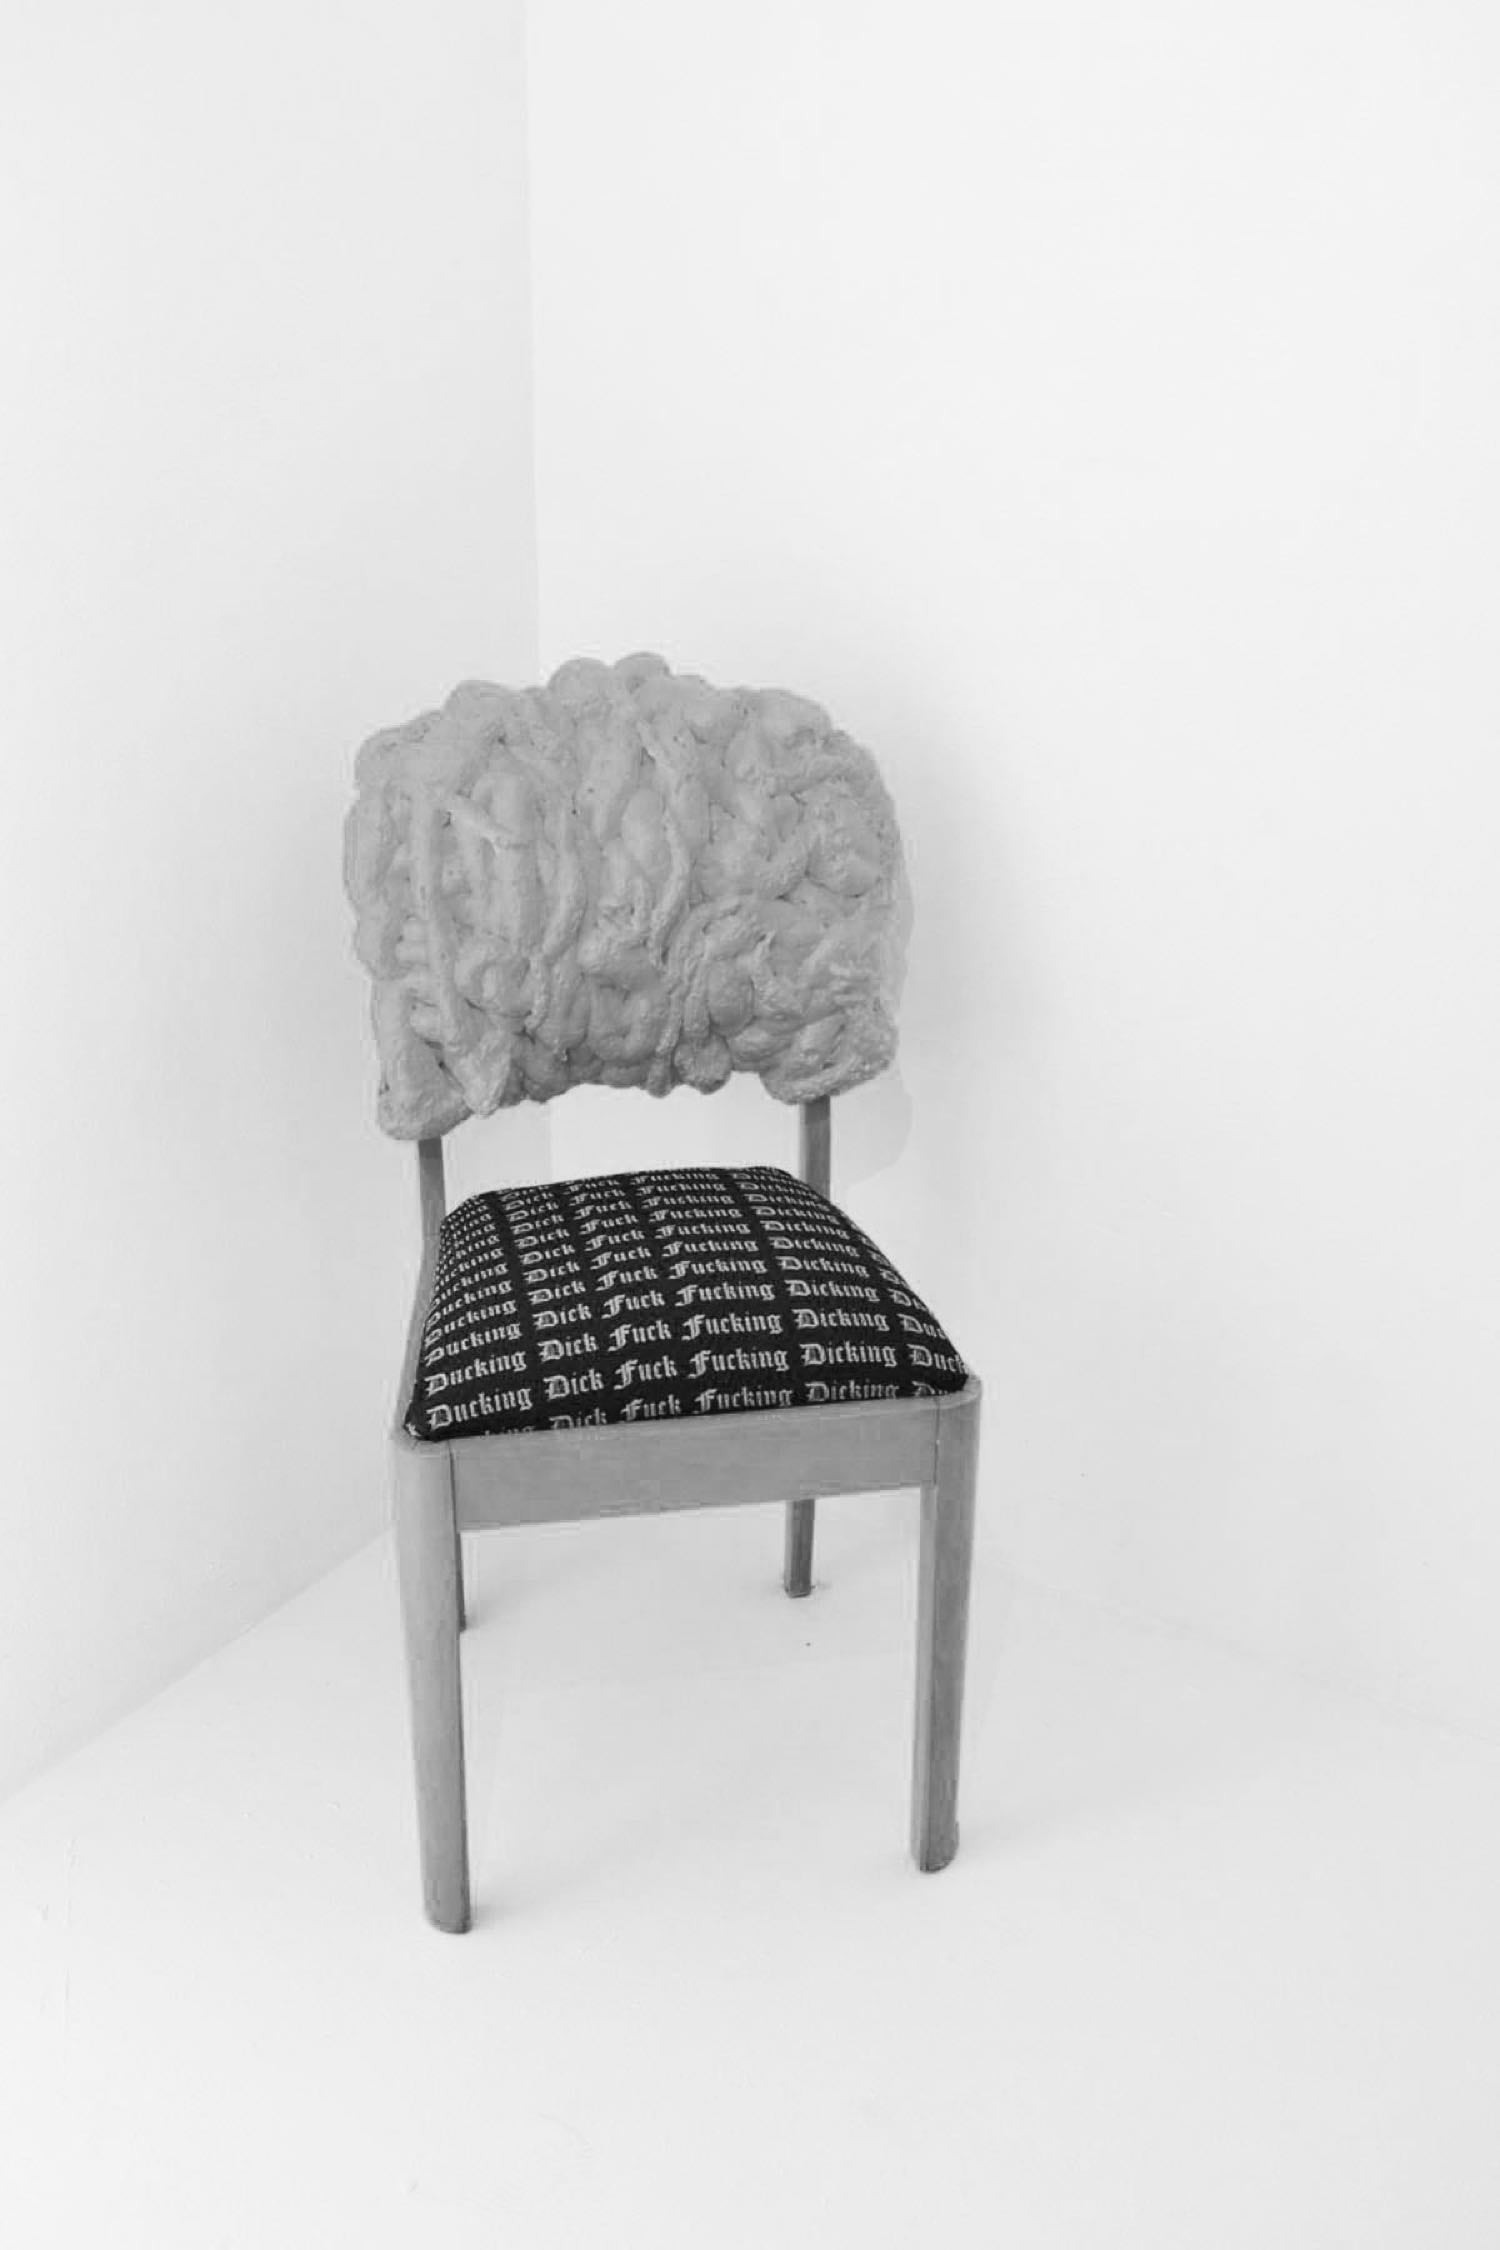 Image 03: Zara Sully, 'Ducking Around with a Chair', 2019.